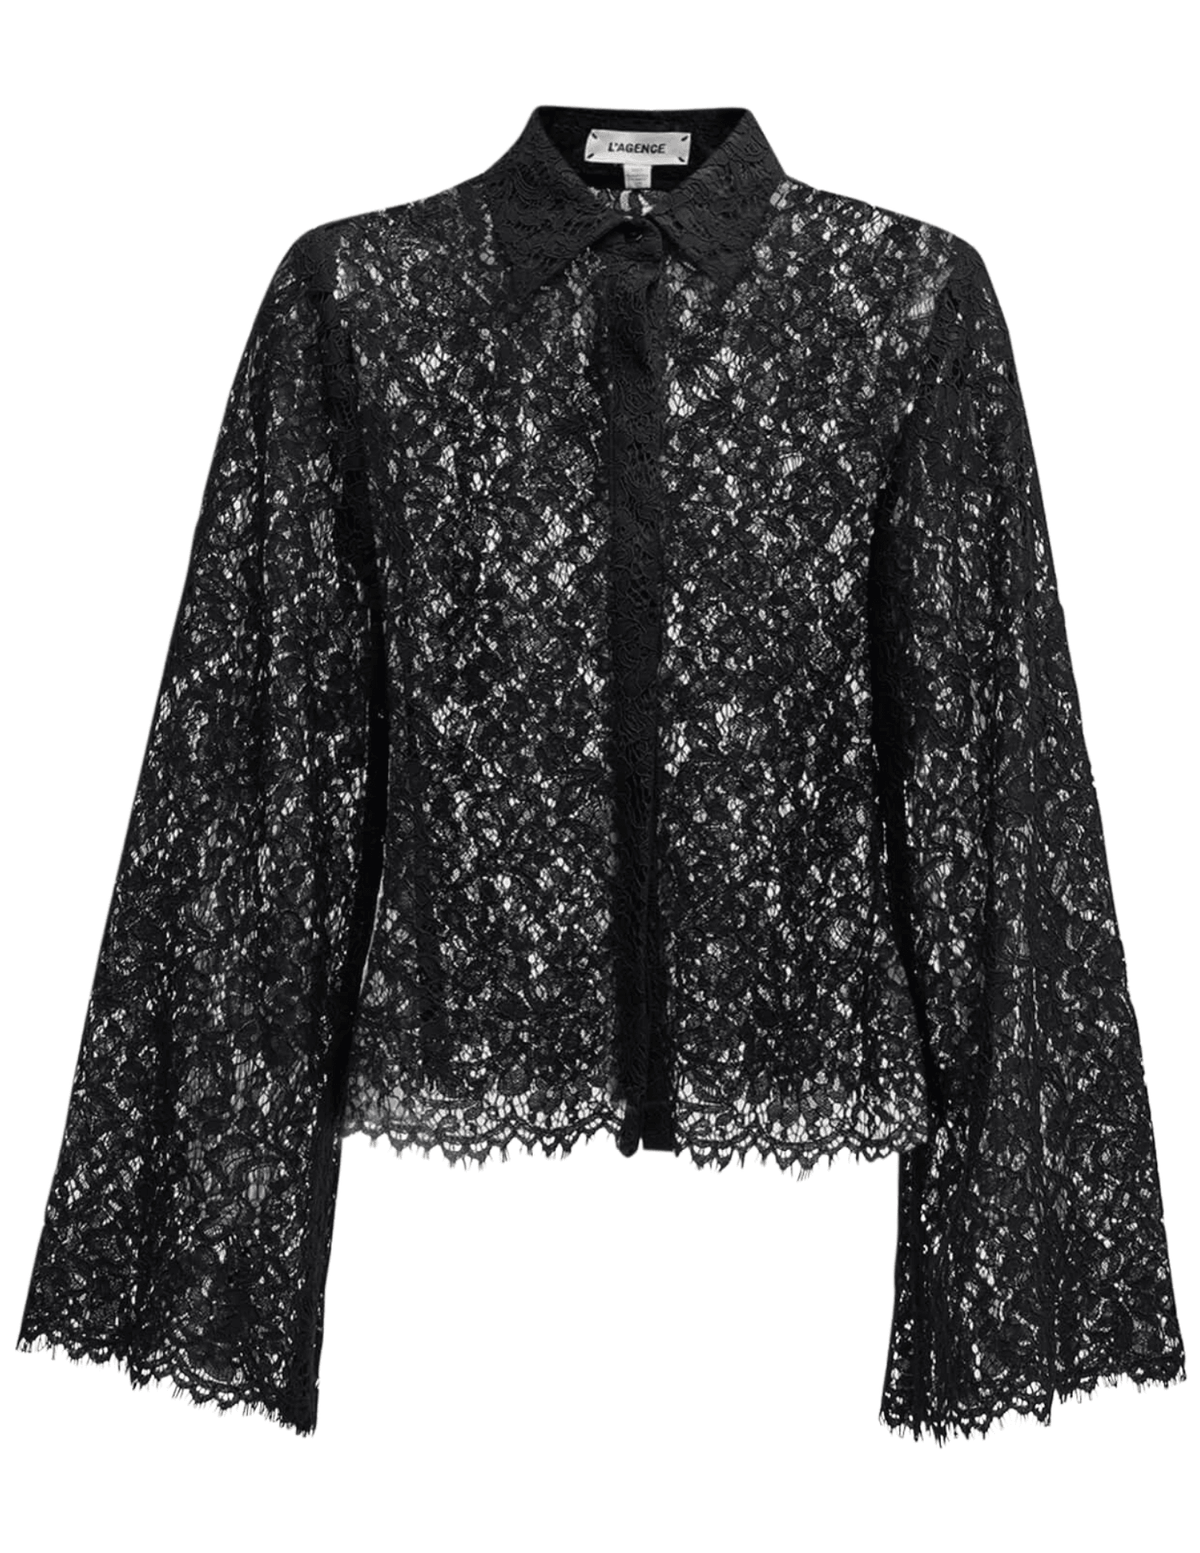 L'Agence Carter Long Sleeve Lace Blouse